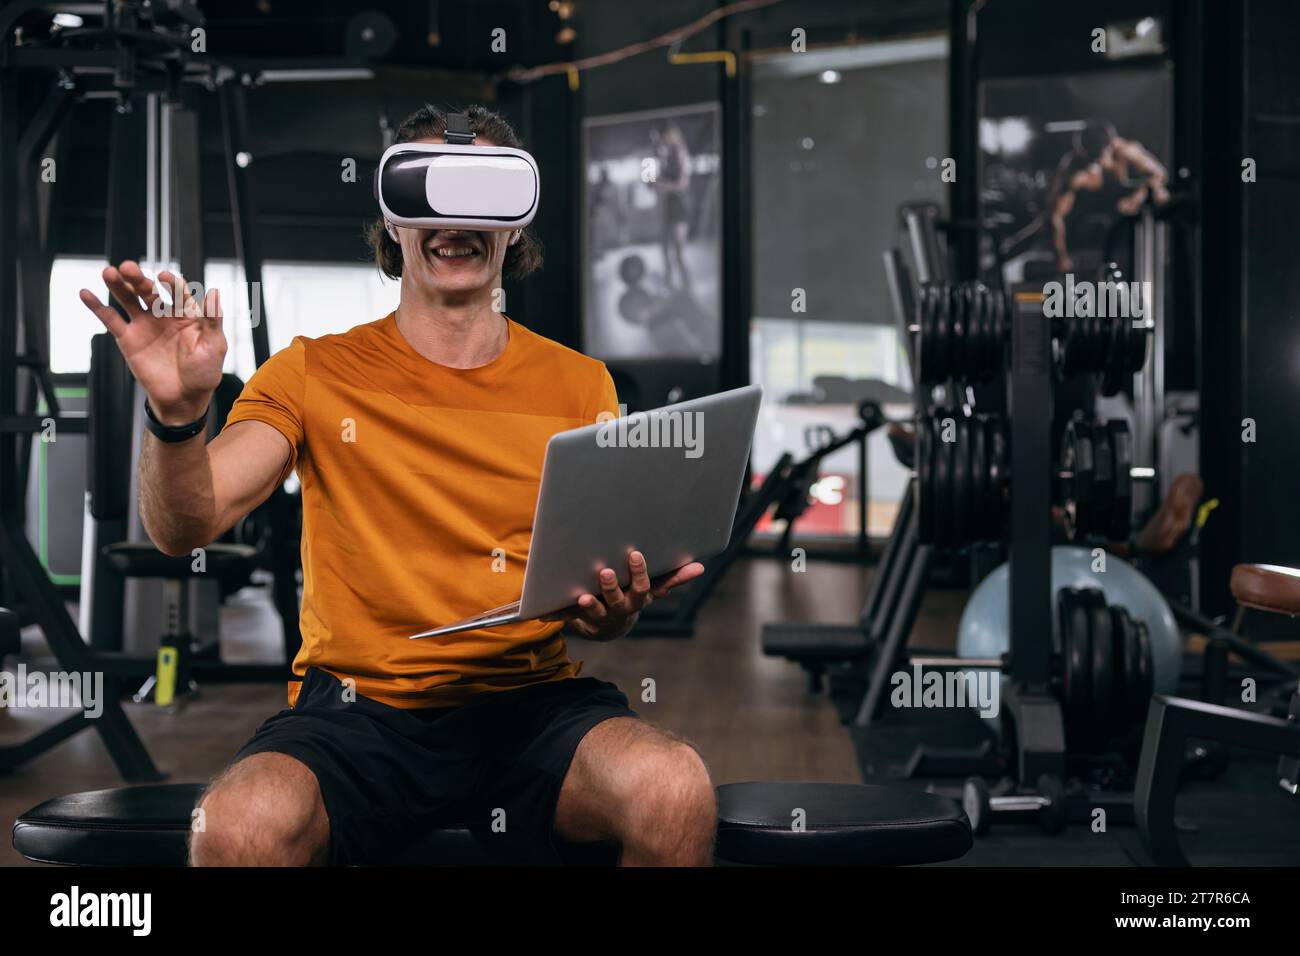 Sport male using VR headset advance visual technology practise learning body fitness Stock Photo